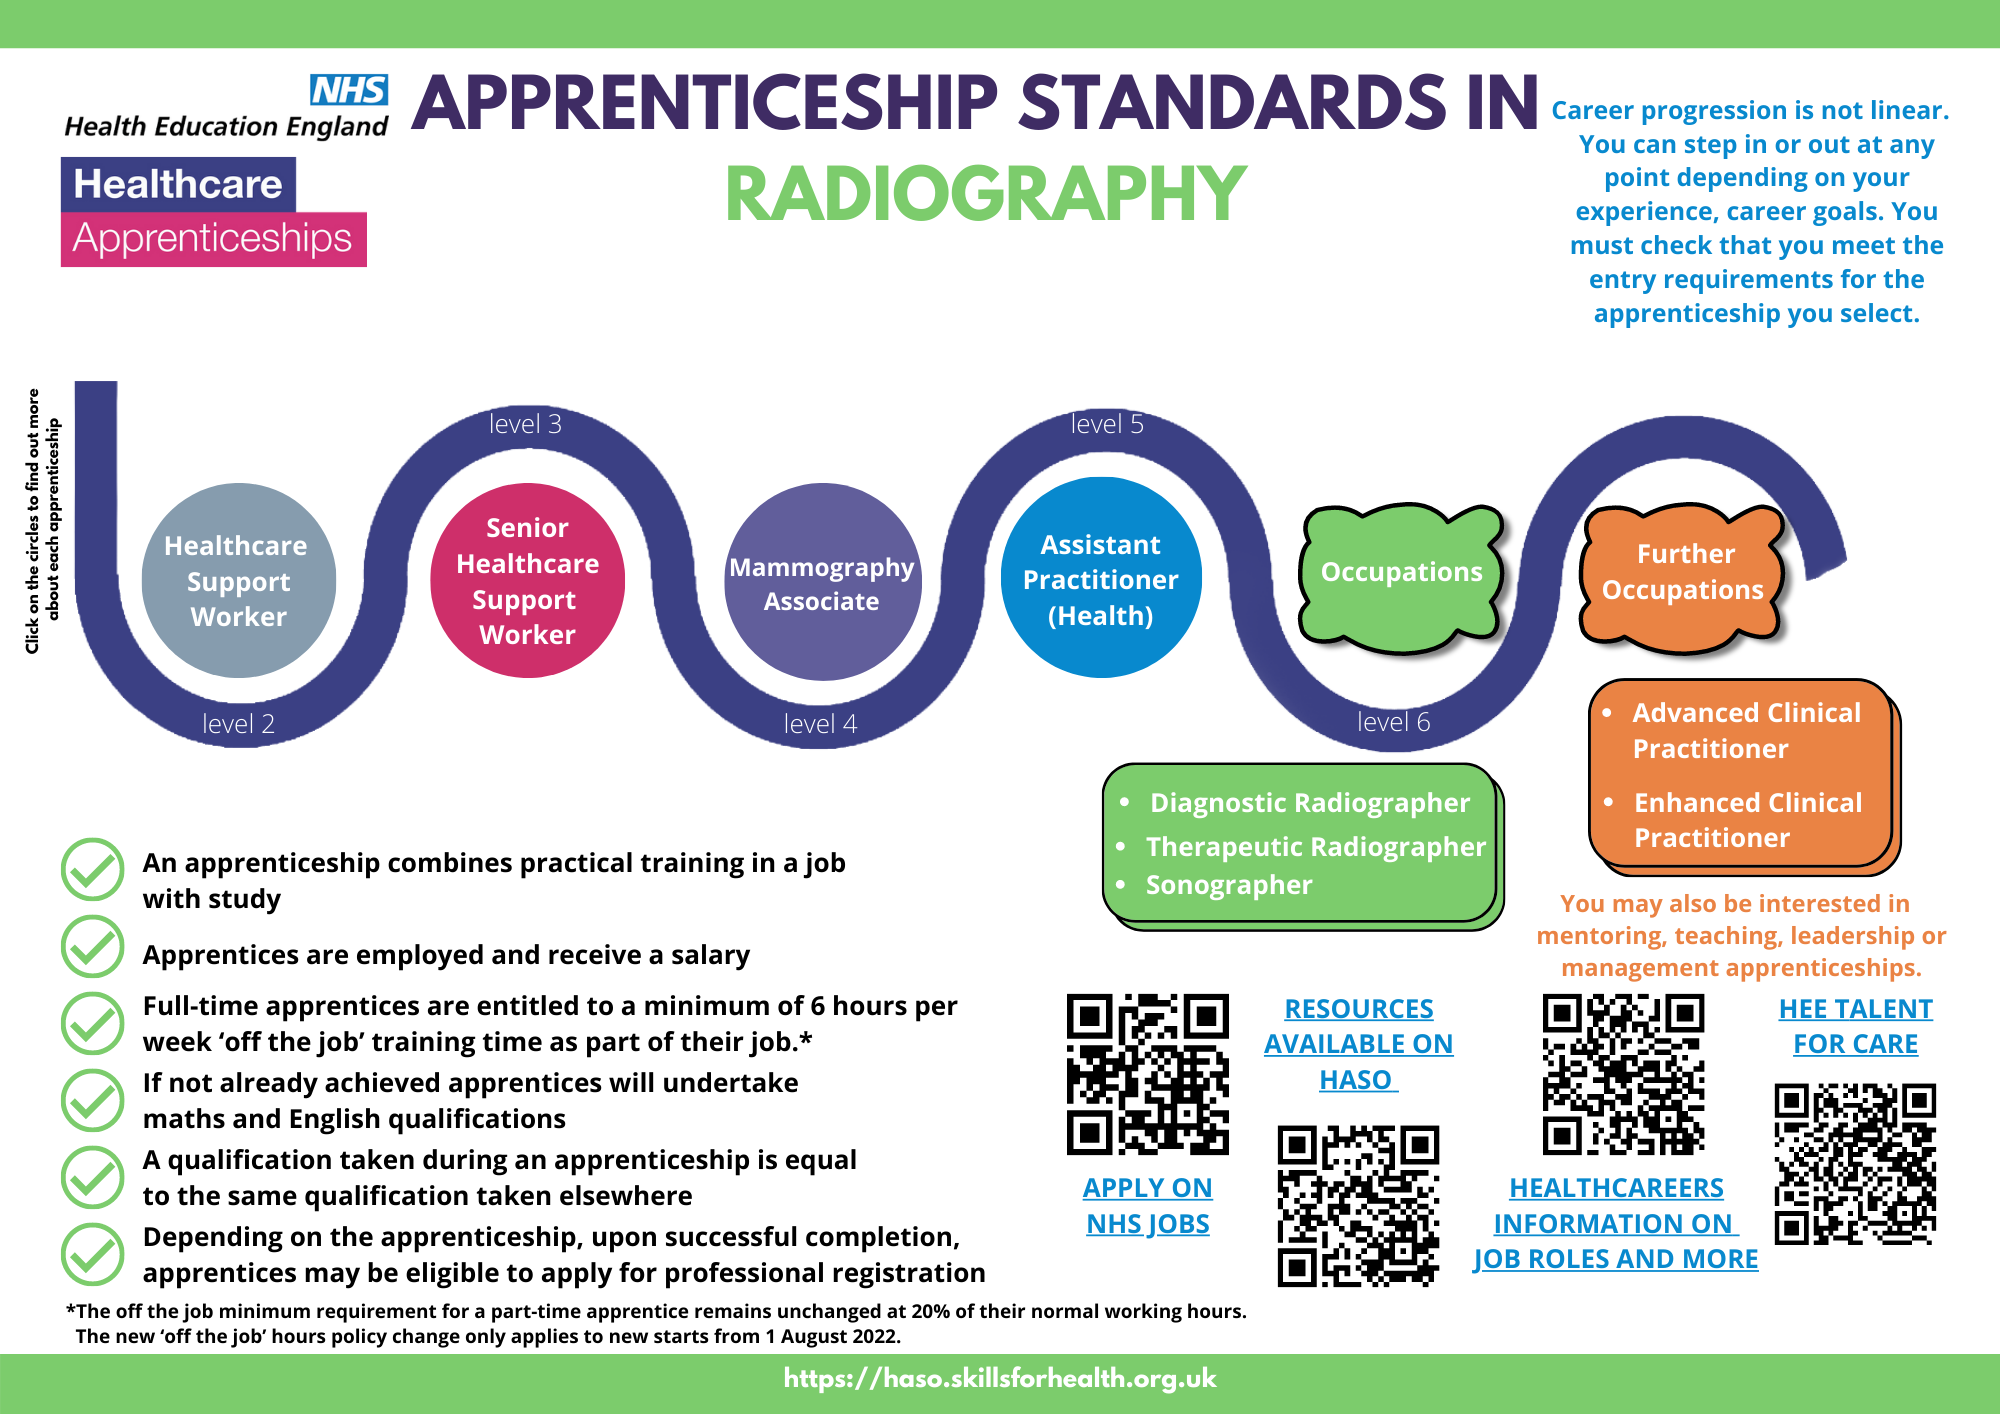 Radiography apprenticeship standards factsheet which shows an overview of apprenticeships in this area. The radiography page, https://haso.skillsforhealth.org.uk/radiography/, also shows these apprenticeships. 